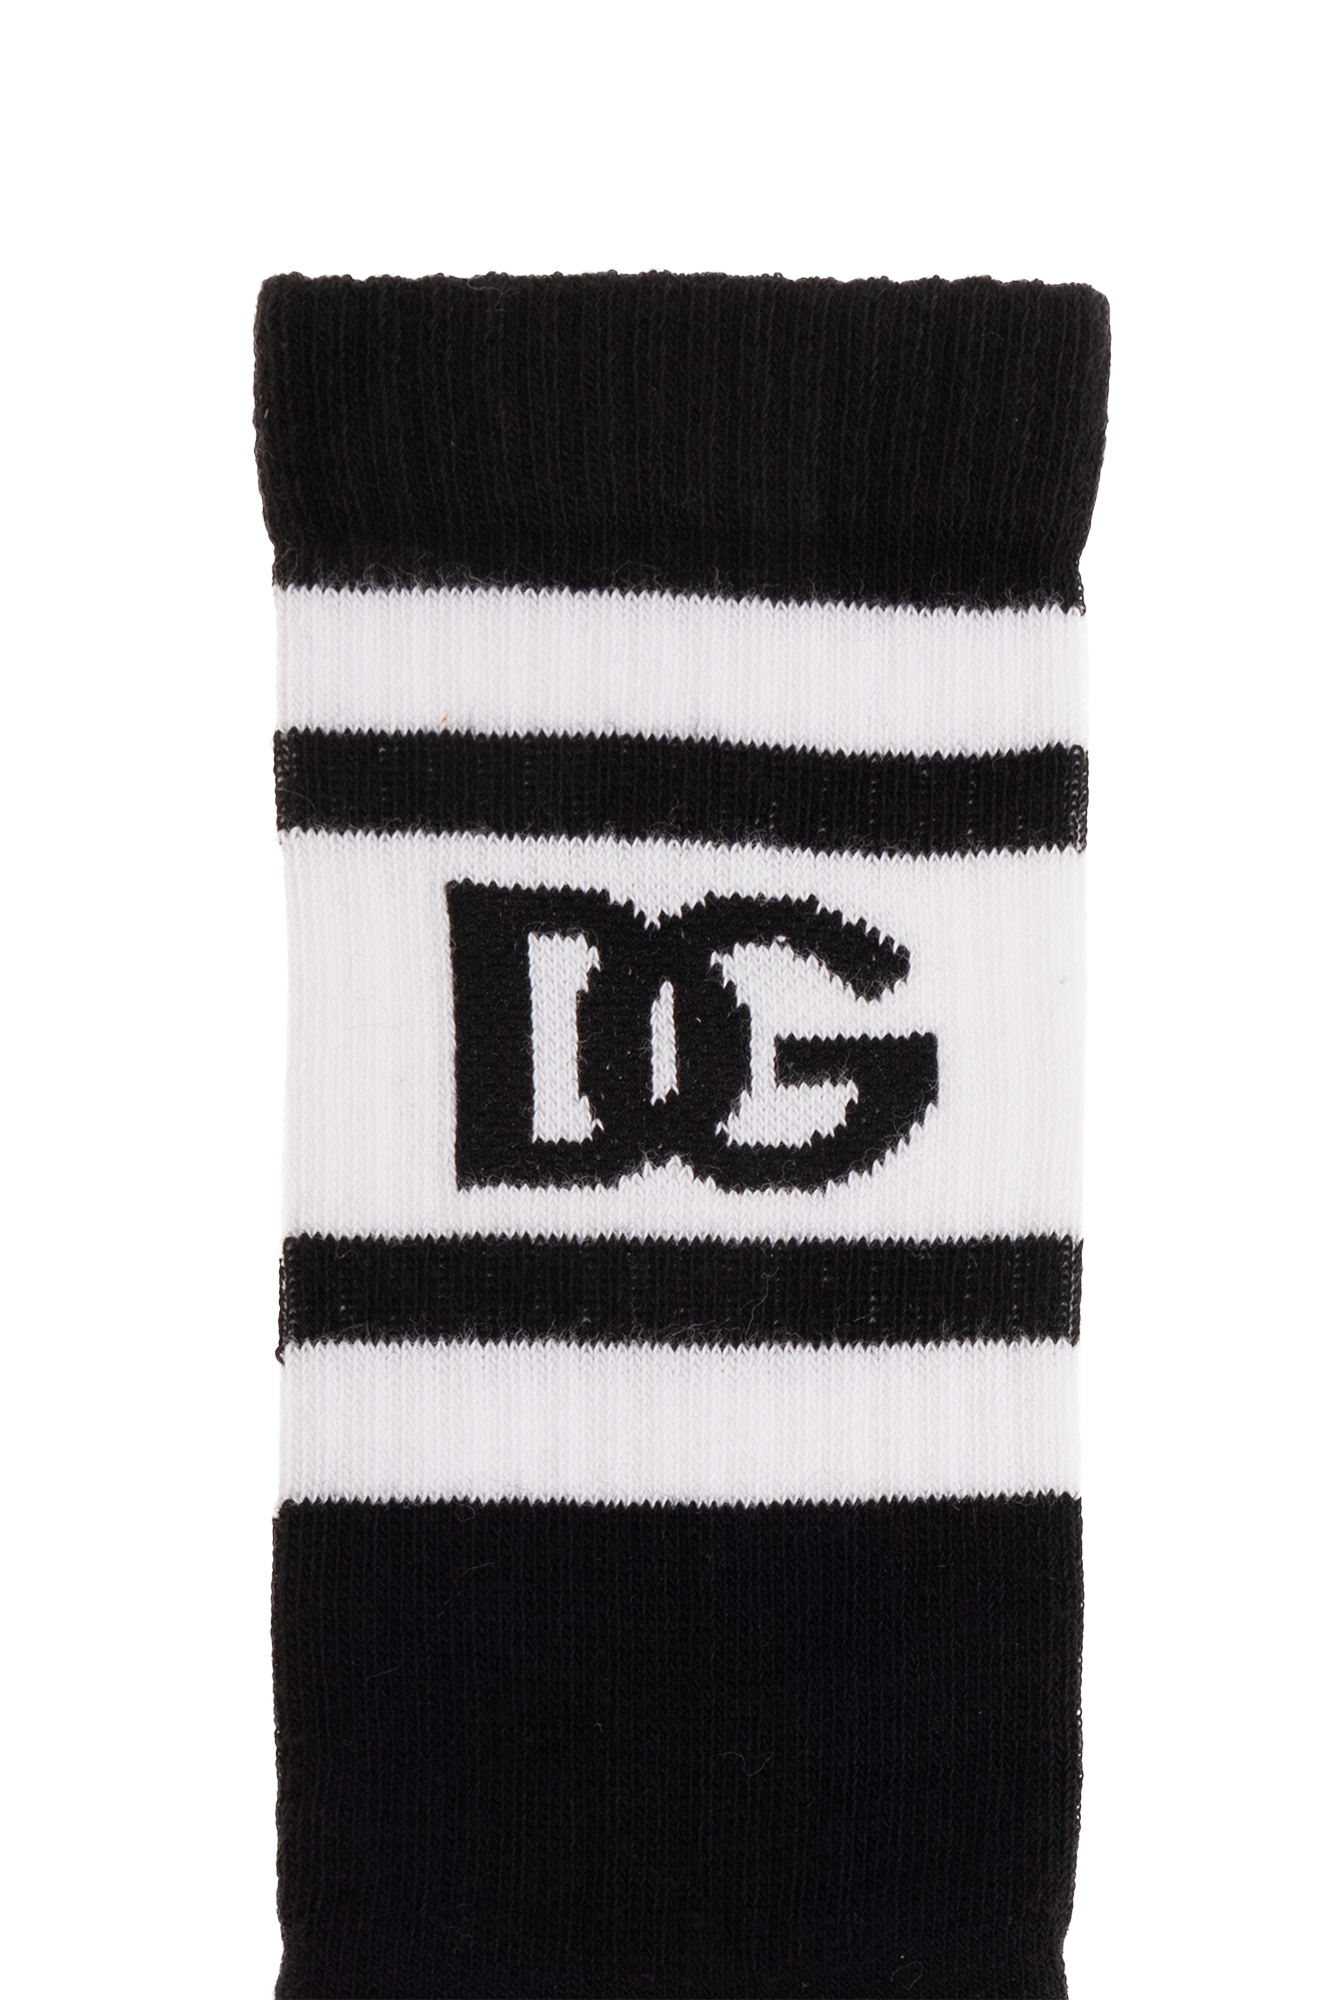 dolce gabbana buckle detail chunky sole boots item Socks with logo